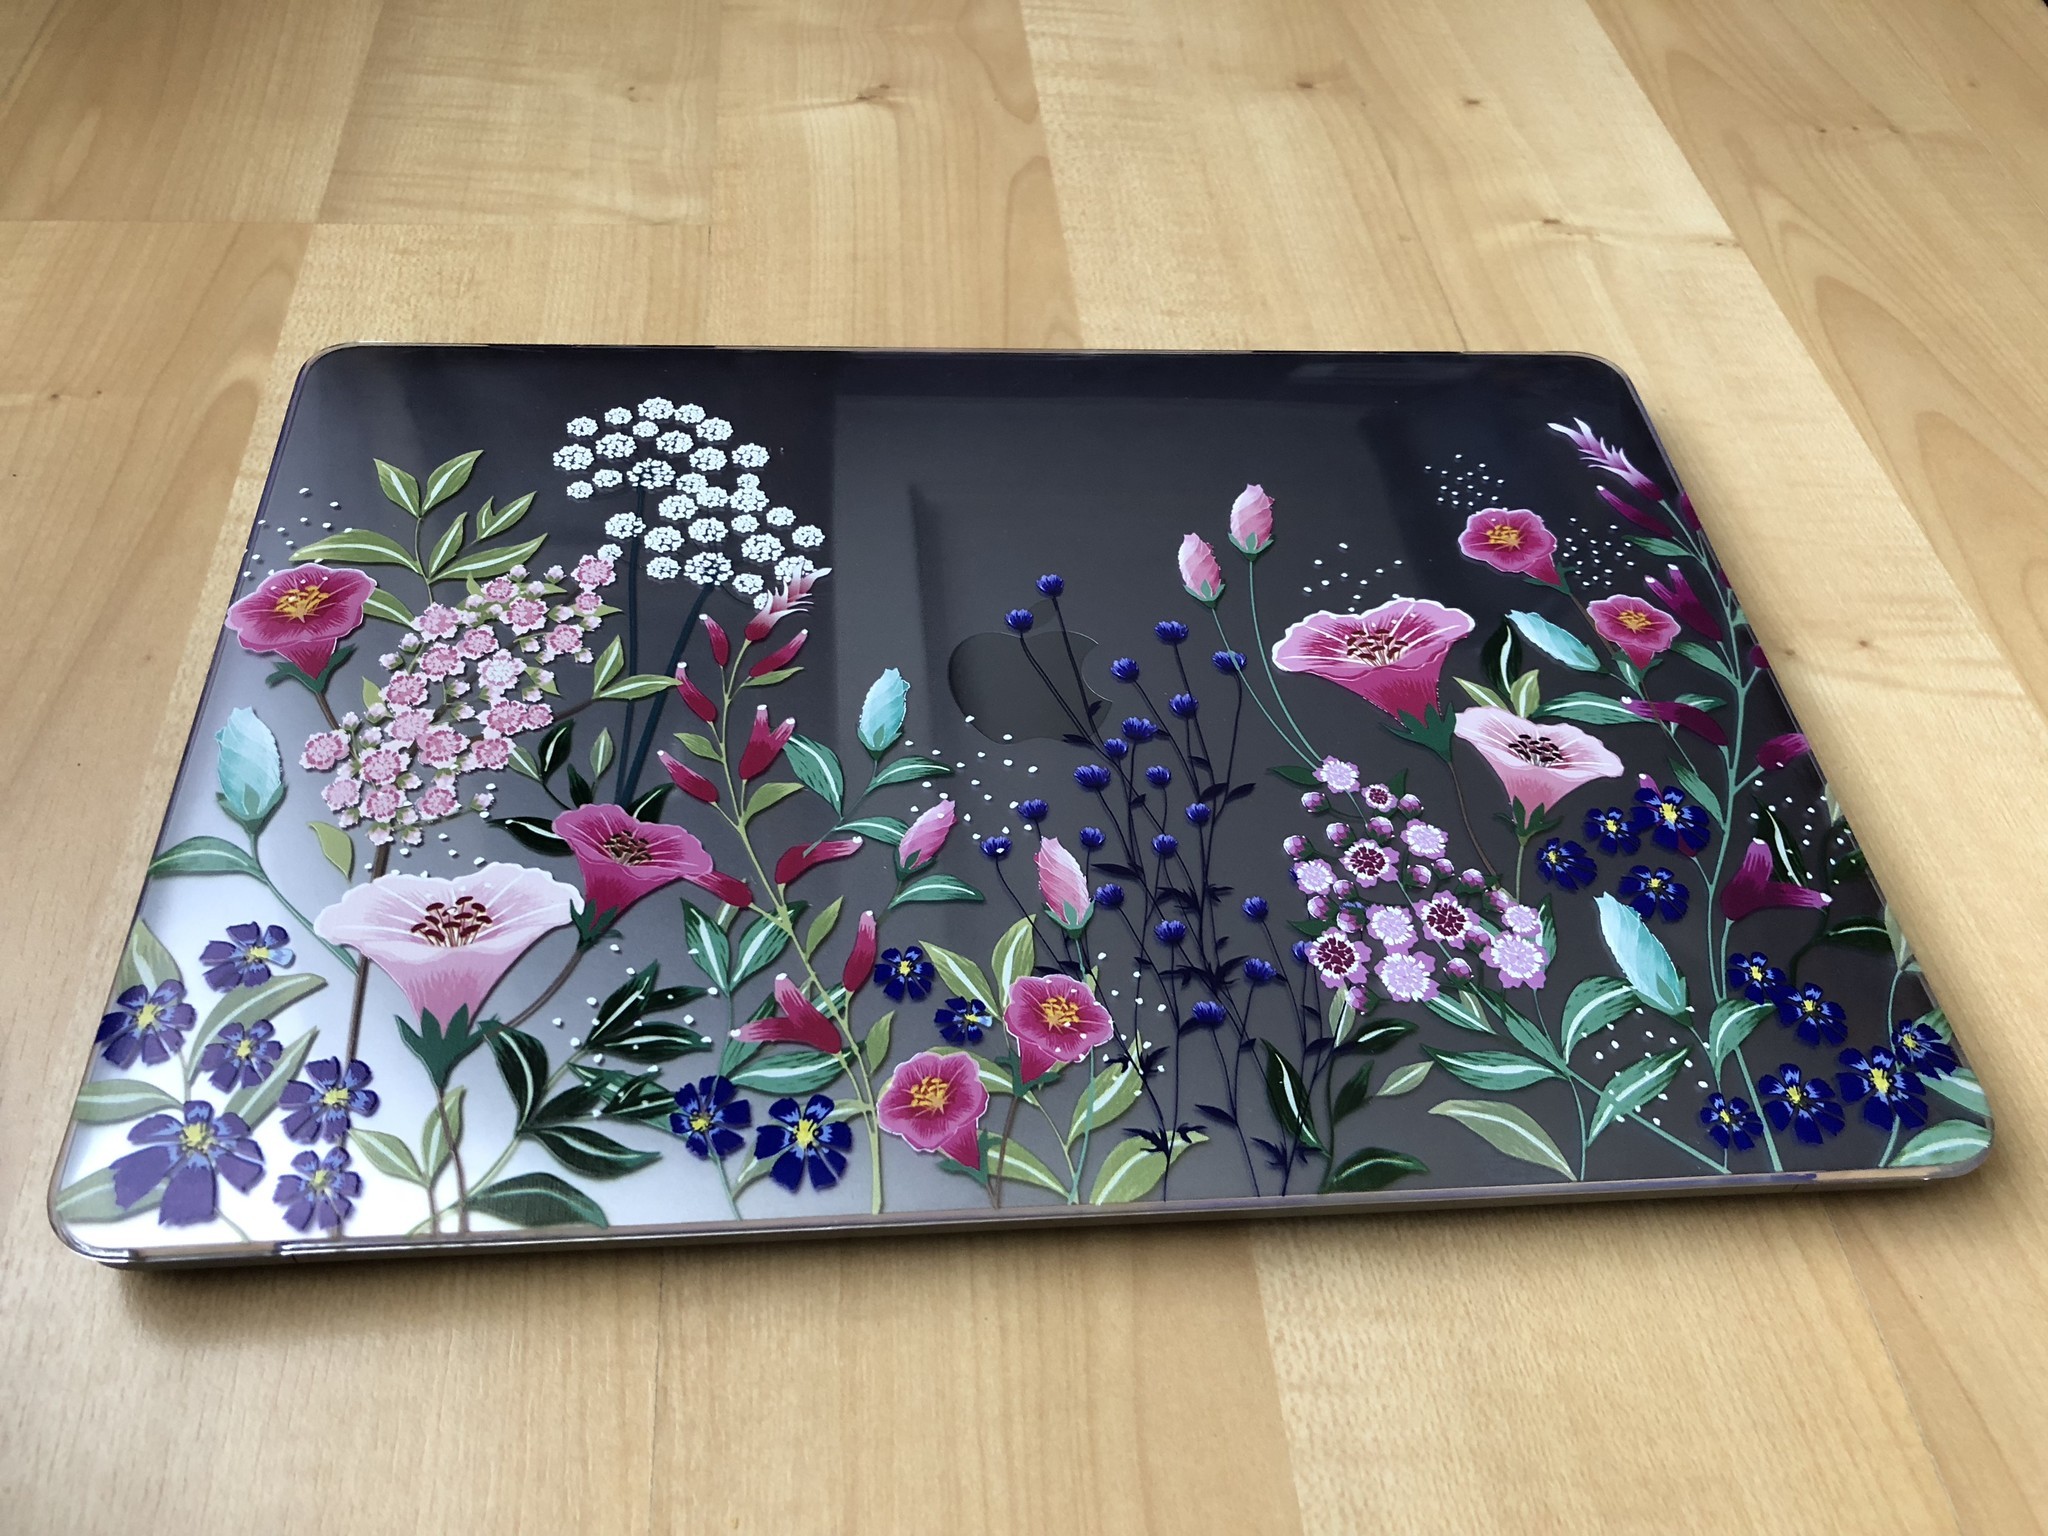 MacBook Case 13 Inch Spring Cartoon Skunk Flowers Leaf Plastic Hard Shell Compatible Mac Air 11 Pro 13 15 MacBook Pro Screen Protector Protection for MacBook 2016-2019 Version 